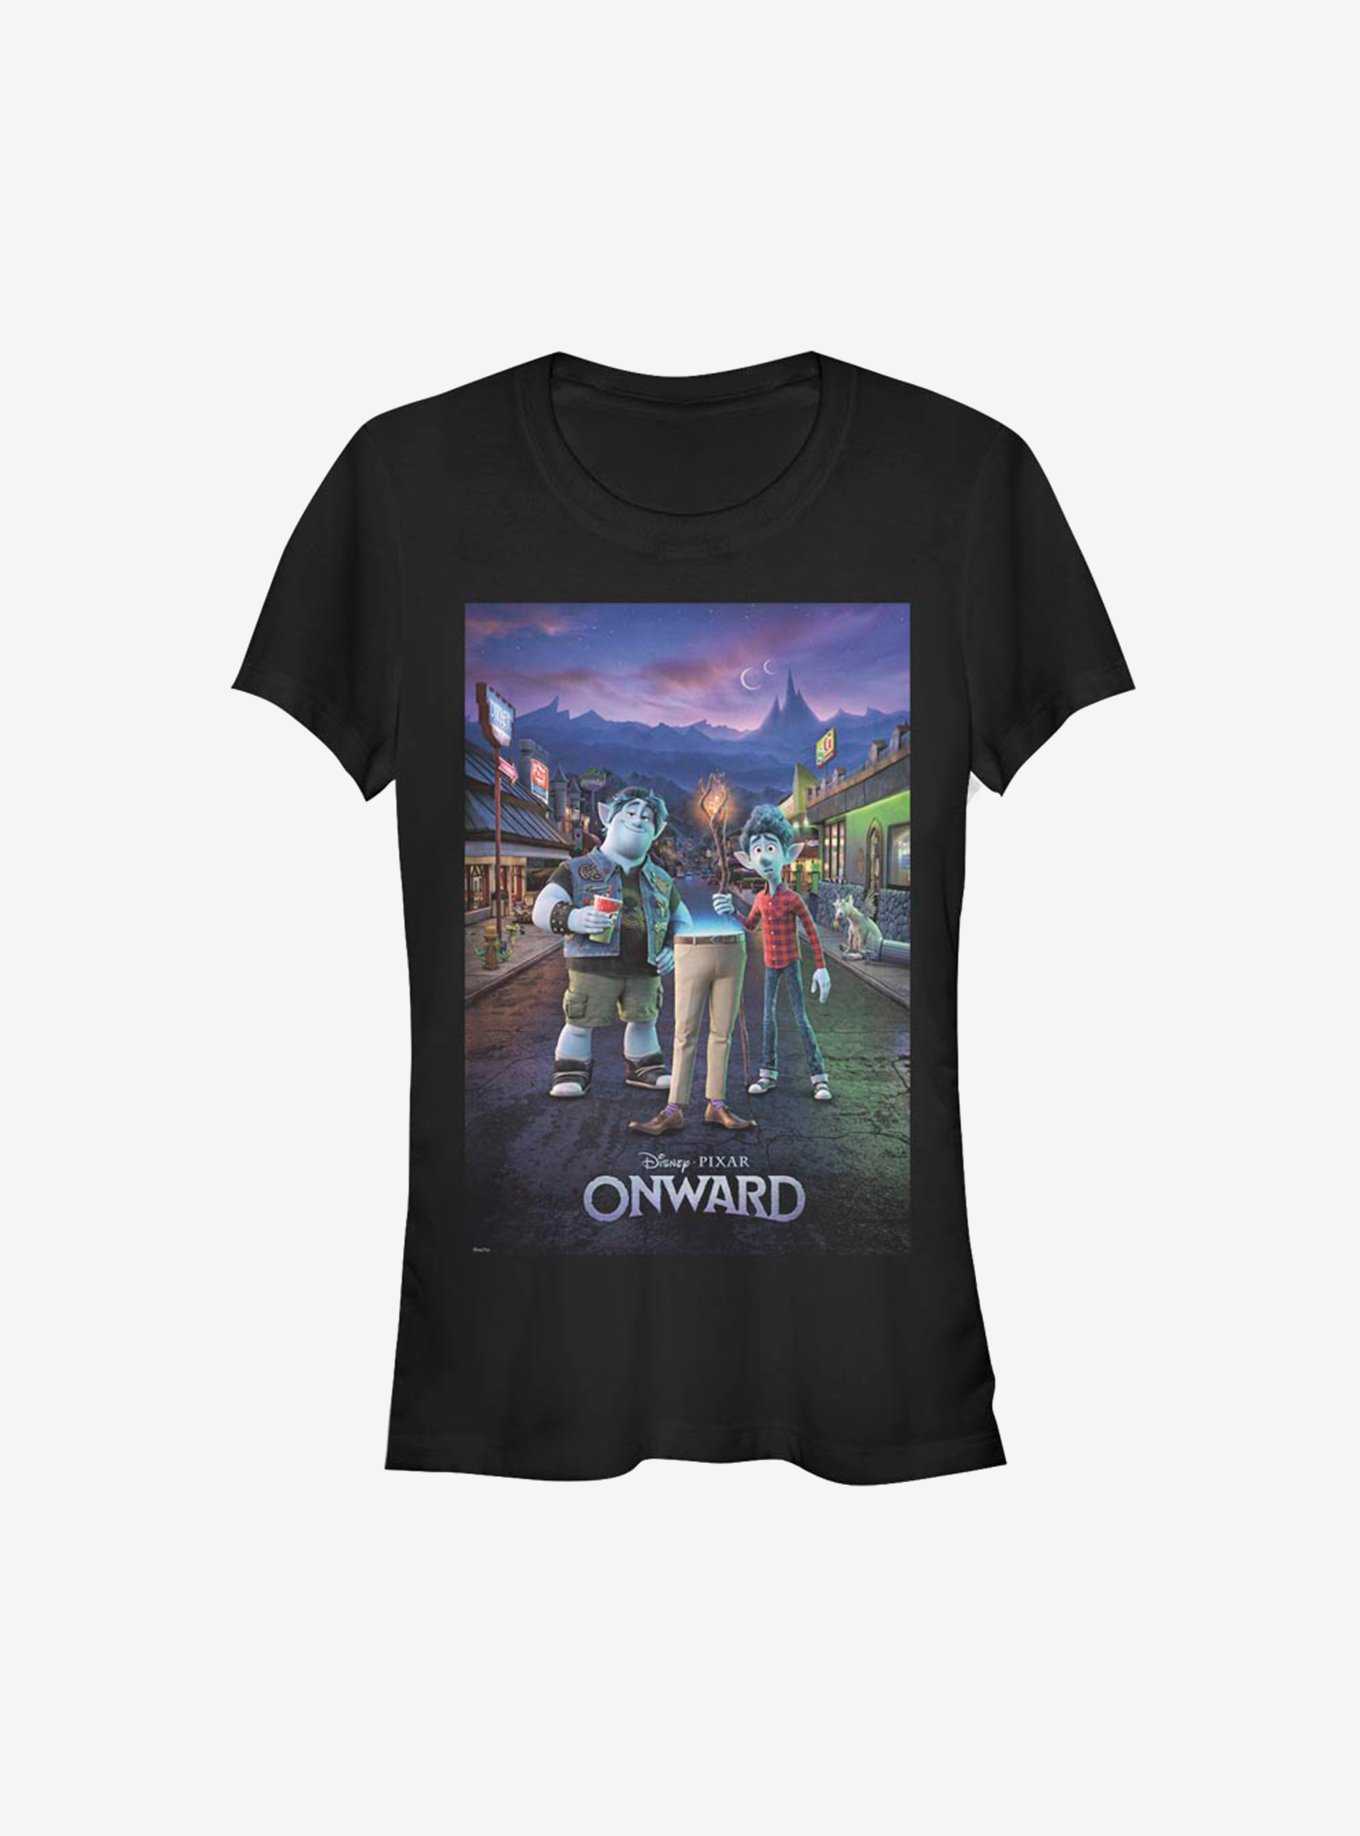 OFFICIAL Onward & | Topic Movie T-Shirts Merchandise Hot